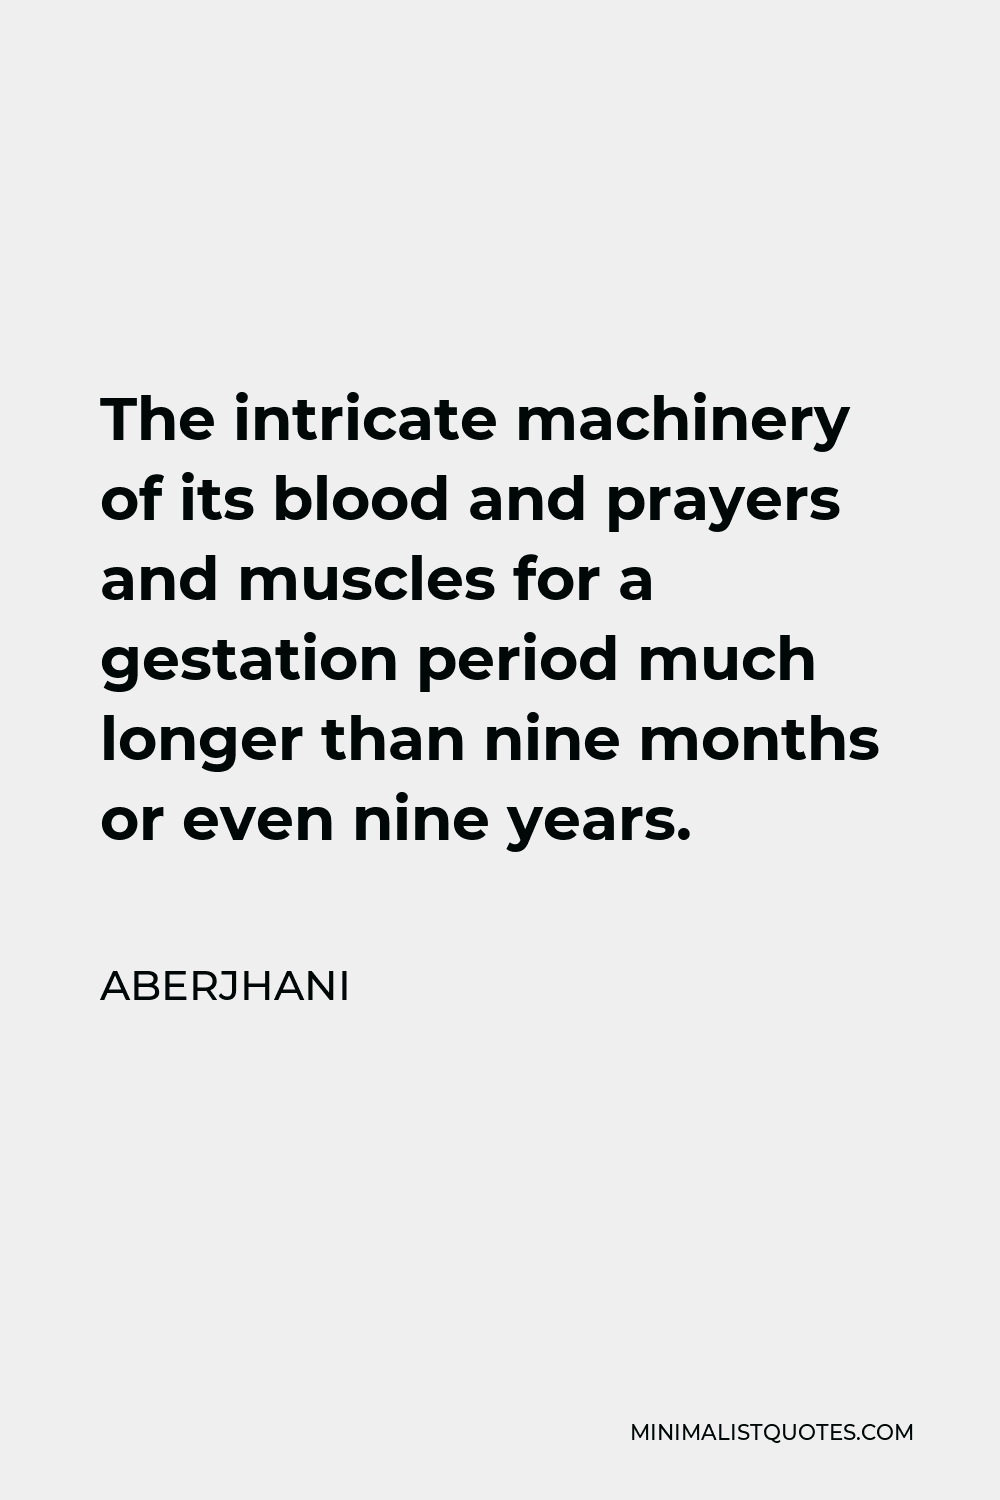 Aberjhani Quote - The intricate machinery of its blood and prayers and muscles for a gestation period much longer than nine months or even nine years.